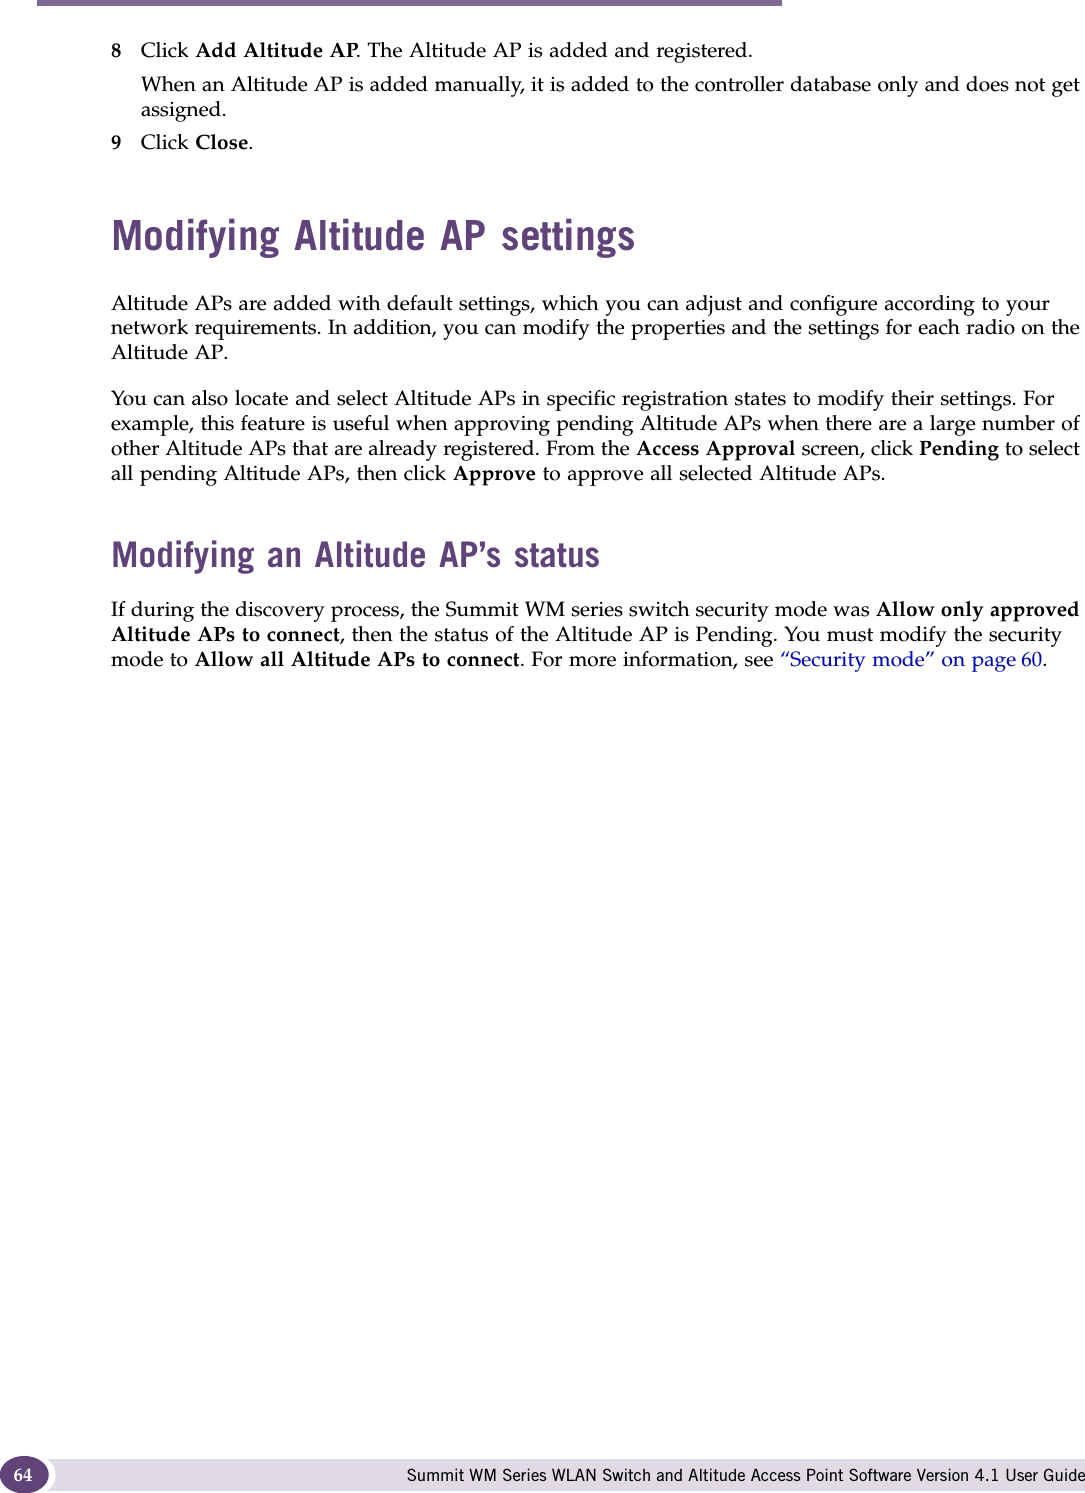 Configuring the Altitude AP Summit WM Series WLAN Switch and Altitude Access Point Software Version 4.1 User Guide648Click Add Altitude AP. The Altitude AP is added and registered.When an Altitude AP is added manually, it is added to the controller database only and does not get assigned.9Click Close.Modifying Altitude AP settingsAltitude APs are added with default settings, which you can adjust and configure according to your network requirements. In addition, you can modify the properties and the settings for each radio on the Altitude AP. You can also locate and select Altitude APs in specific registration states to modify their settings. For example, this feature is useful when approving pending Altitude APs when there are a large number of other Altitude APs that are already registered. From the Access Approval screen, click Pending to select all pending Altitude APs, then click Approve to approve all selected Altitude APs. Modifying an Altitude AP’s statusIf during the discovery process, the Summit WM series switch security mode was Allow only approved Altitude APs to connect, then the status of the Altitude AP is Pending. You must modify the security mode to Allow all Altitude APs to connect. For more information, see “Security mode” on page 60. 